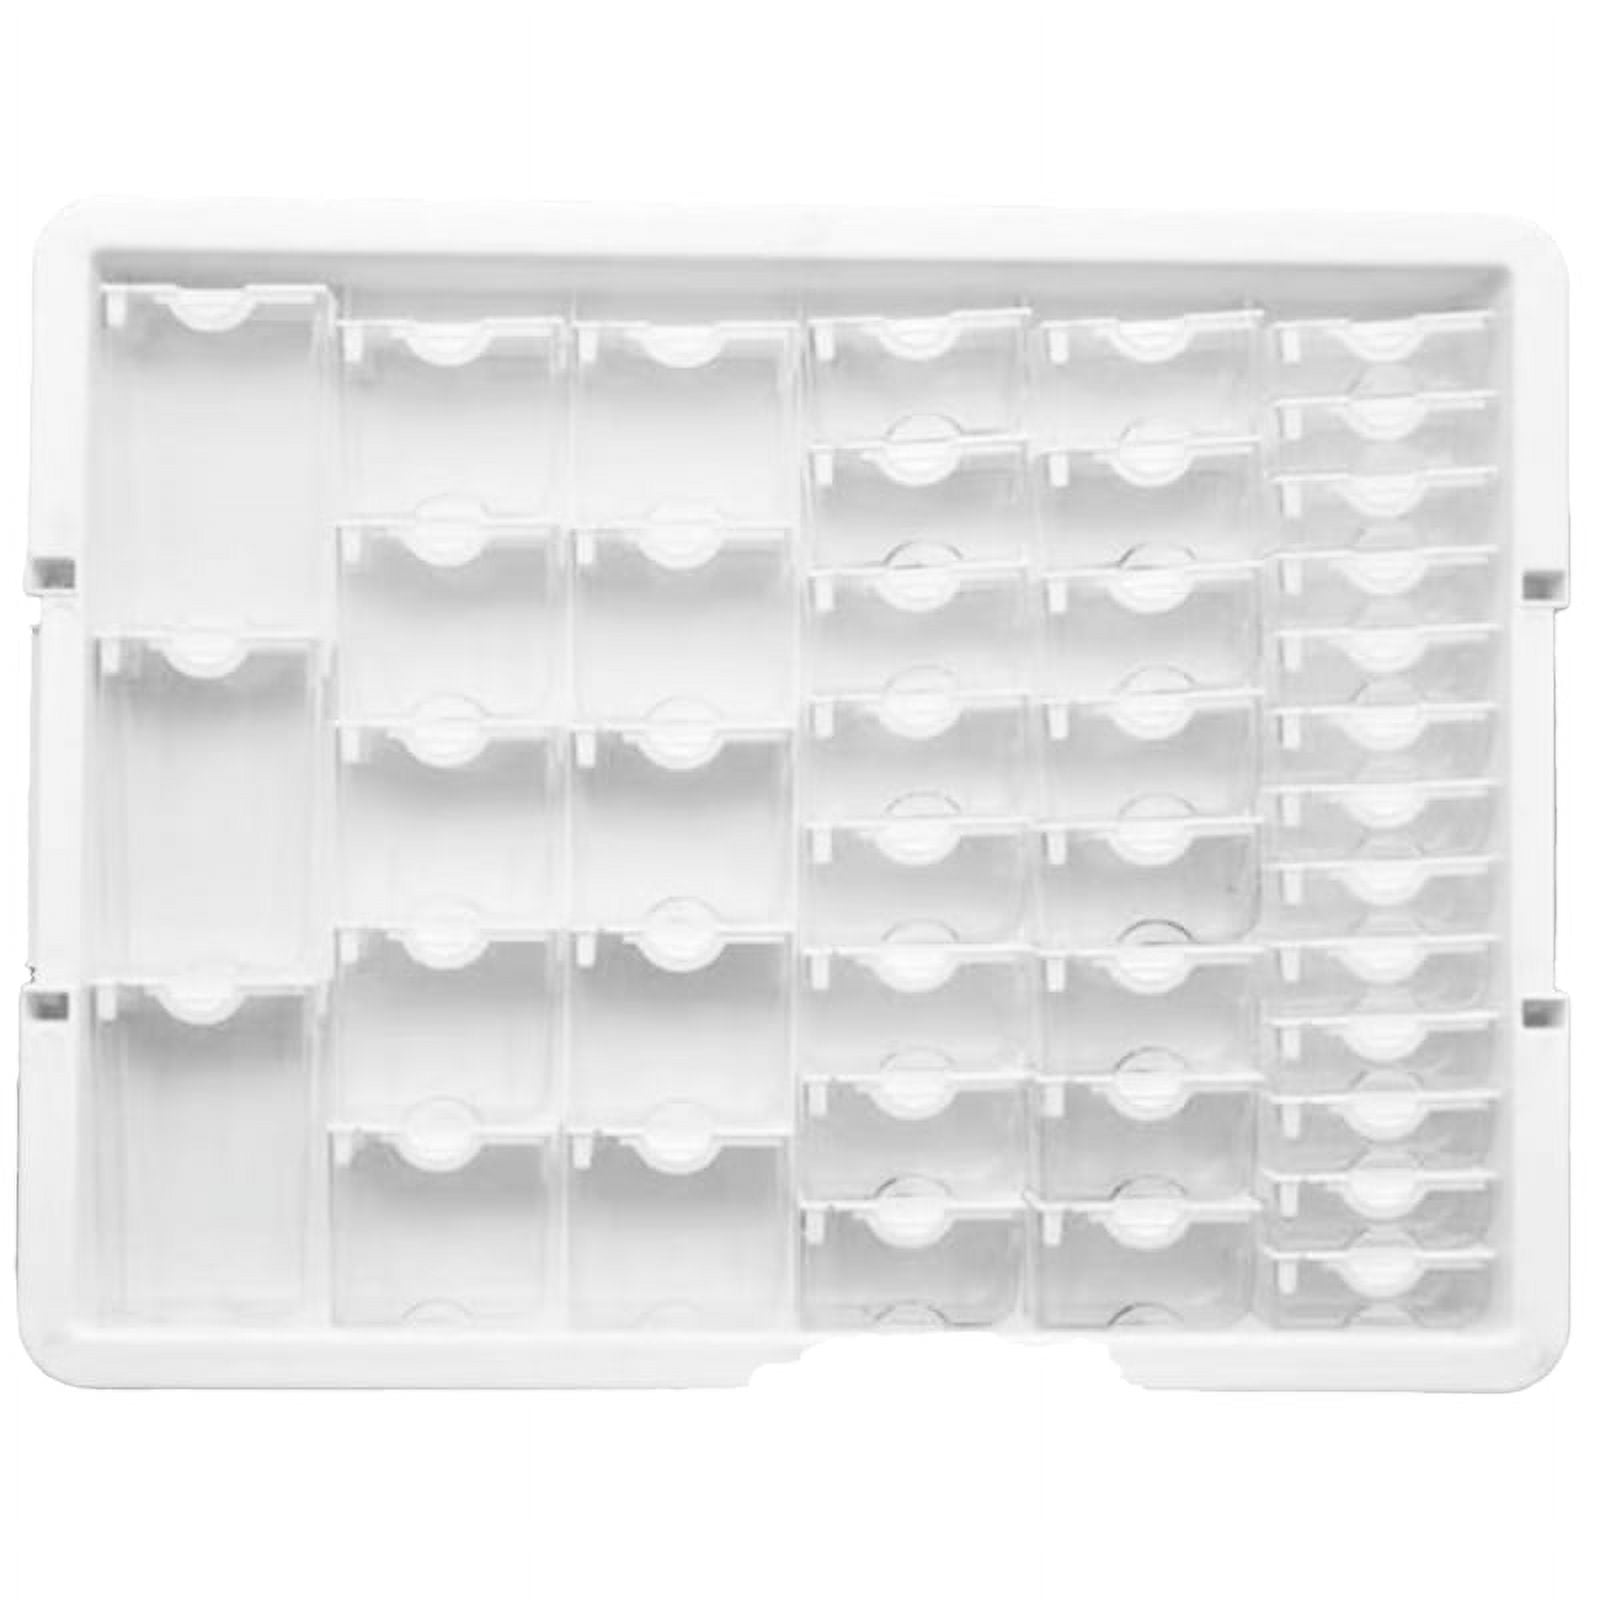 Drill Containers Storage Box for Diamond Painting Tool 42# 50# 78#